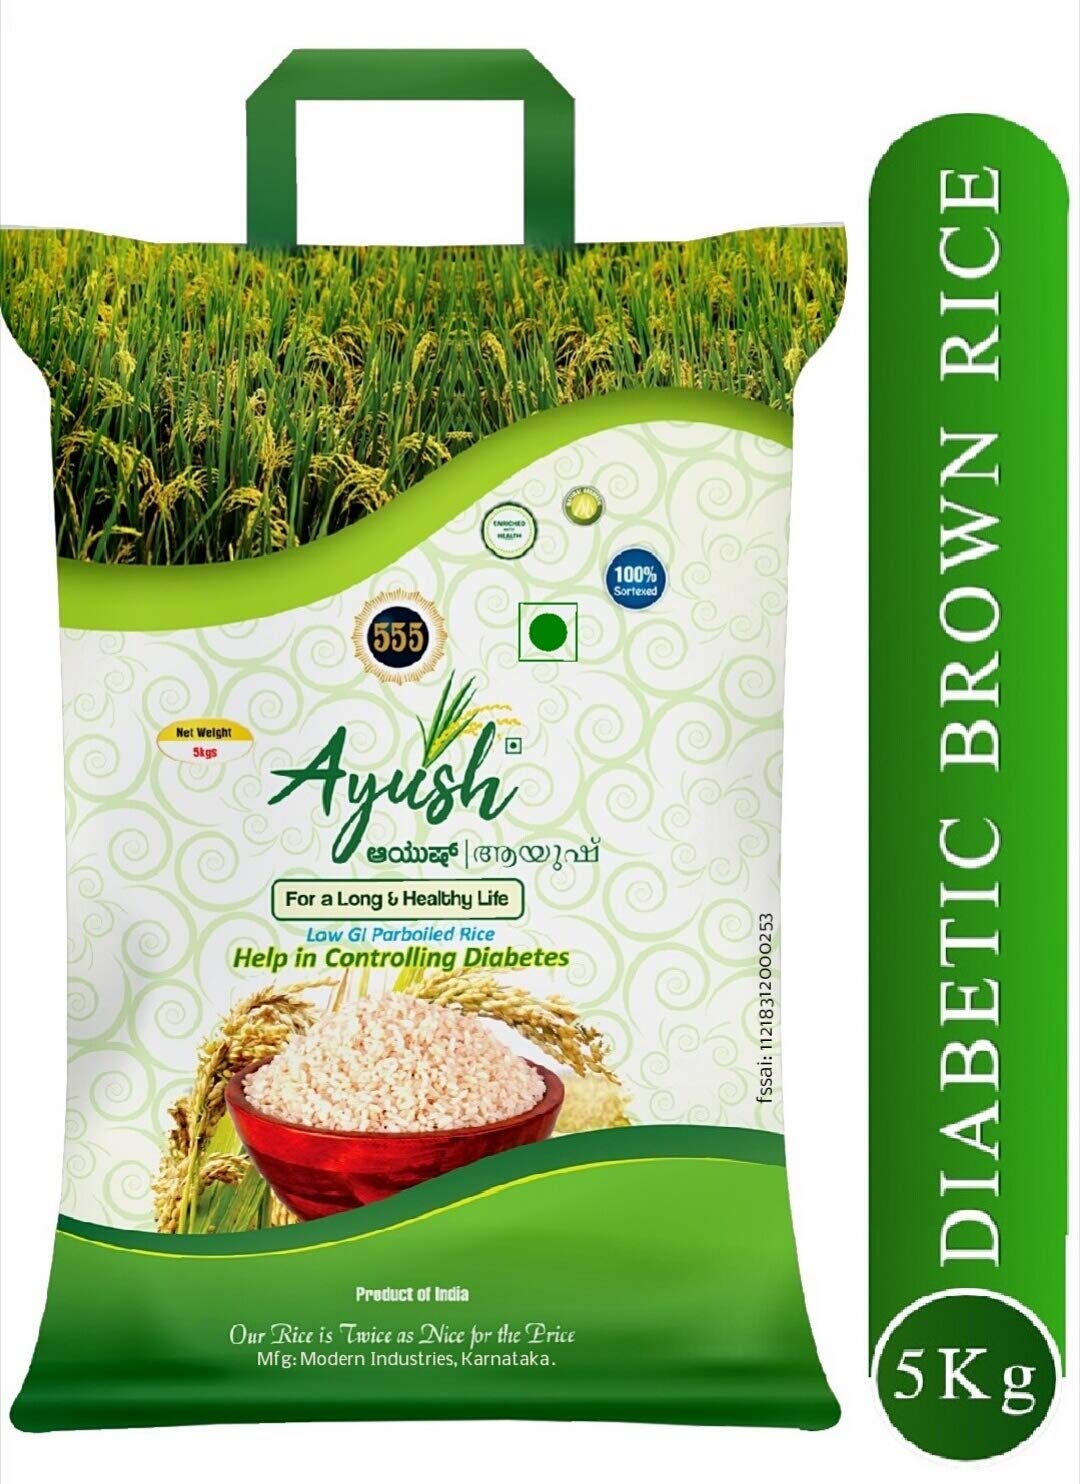 best brown rice brand in india